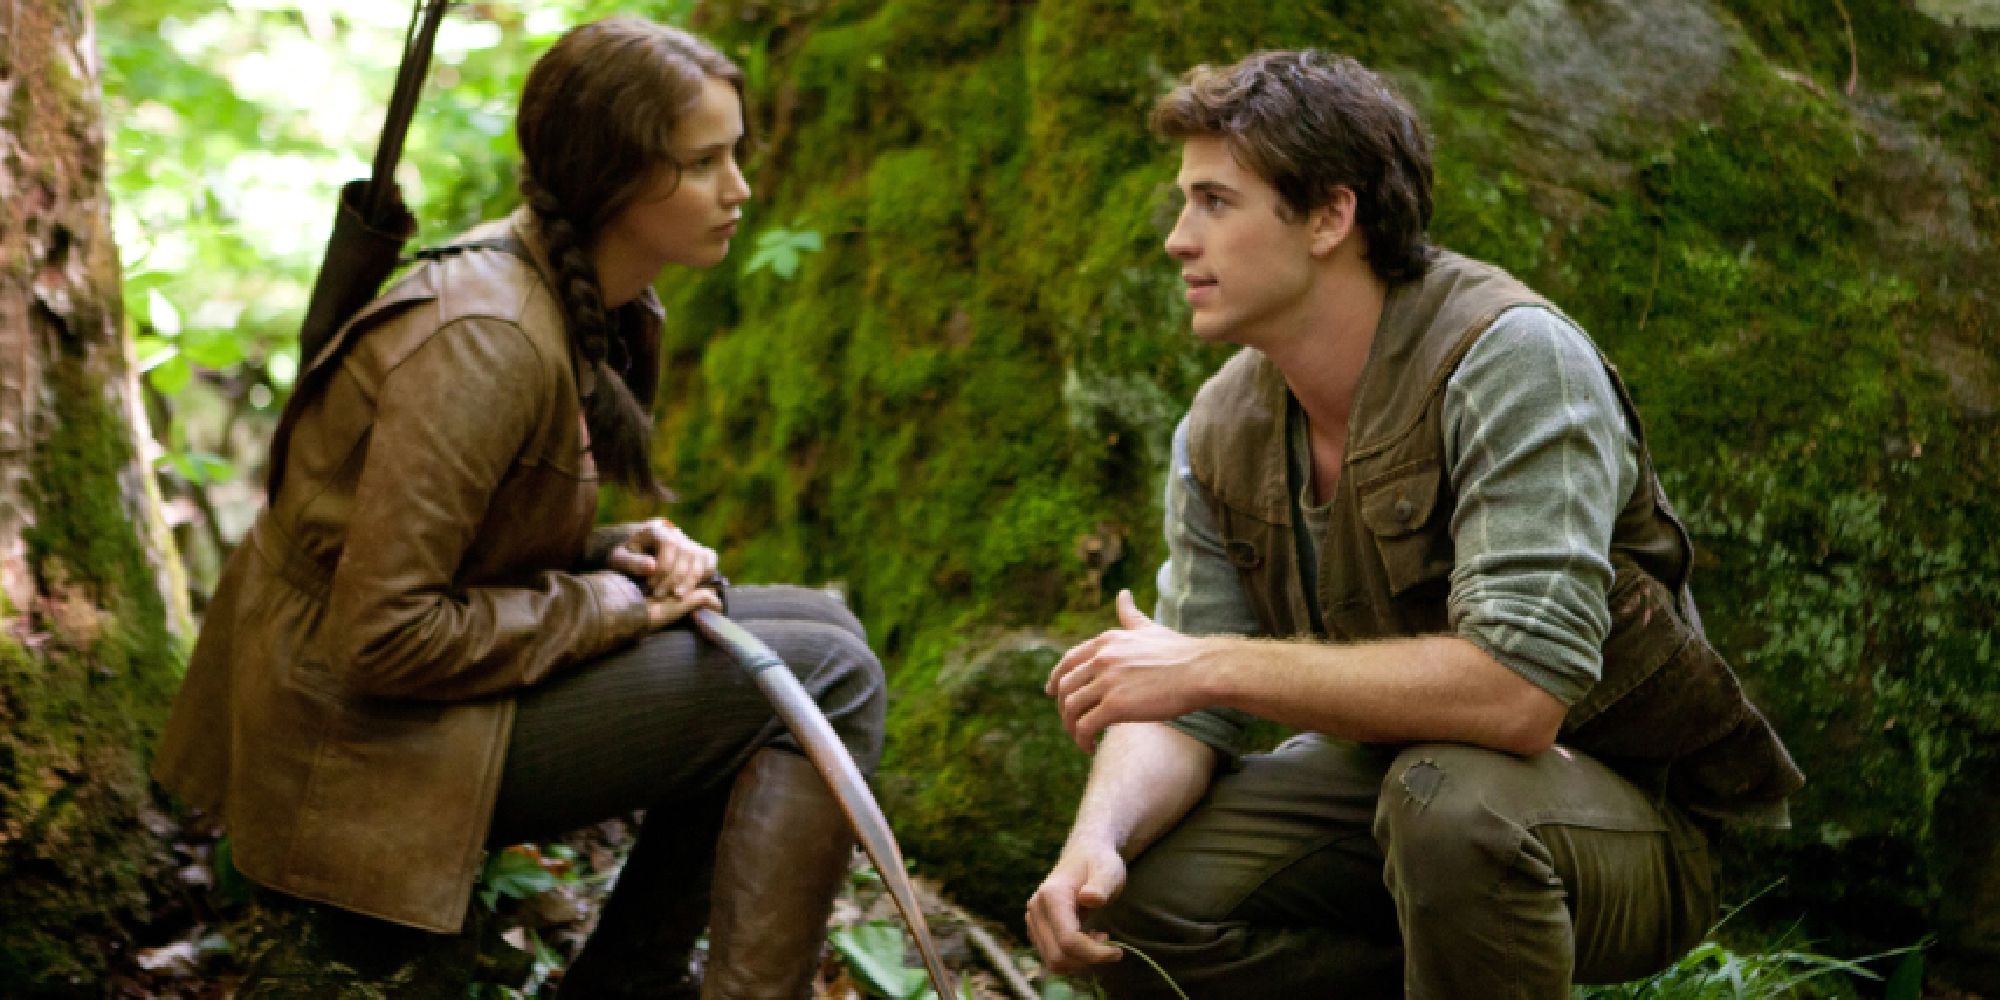 Hunger Games - romance between Gale and Katniss